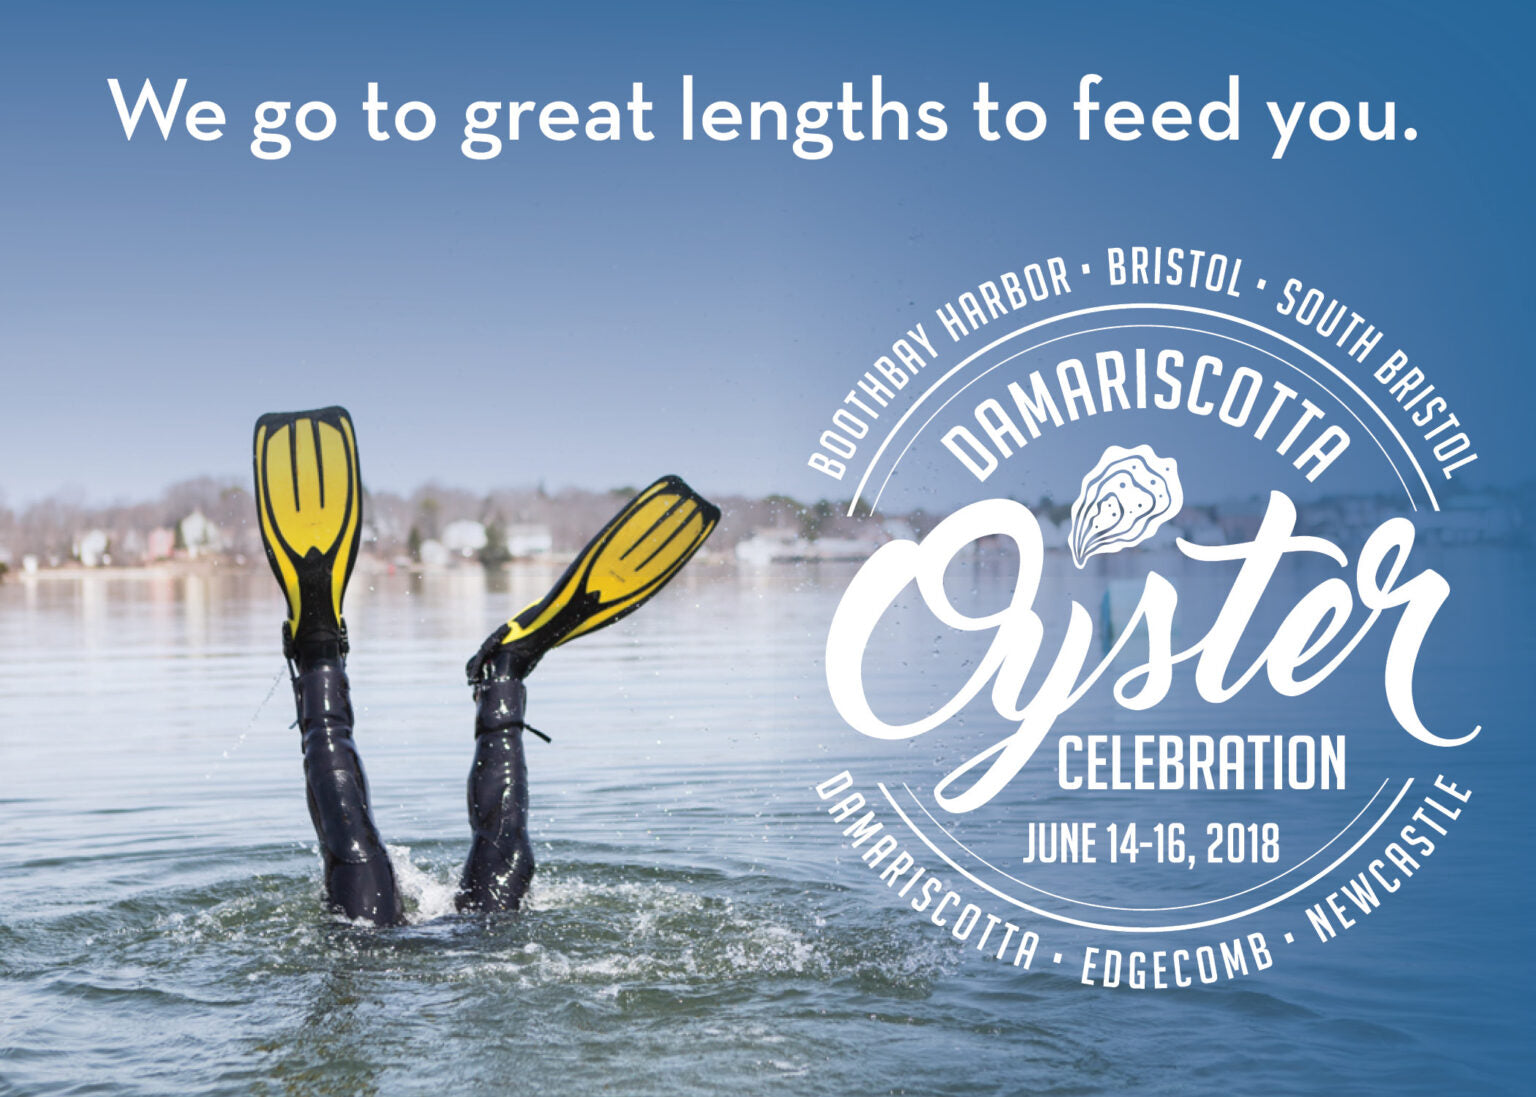 The Damariscotta Oyster Celebration: 2000 Years in the Making